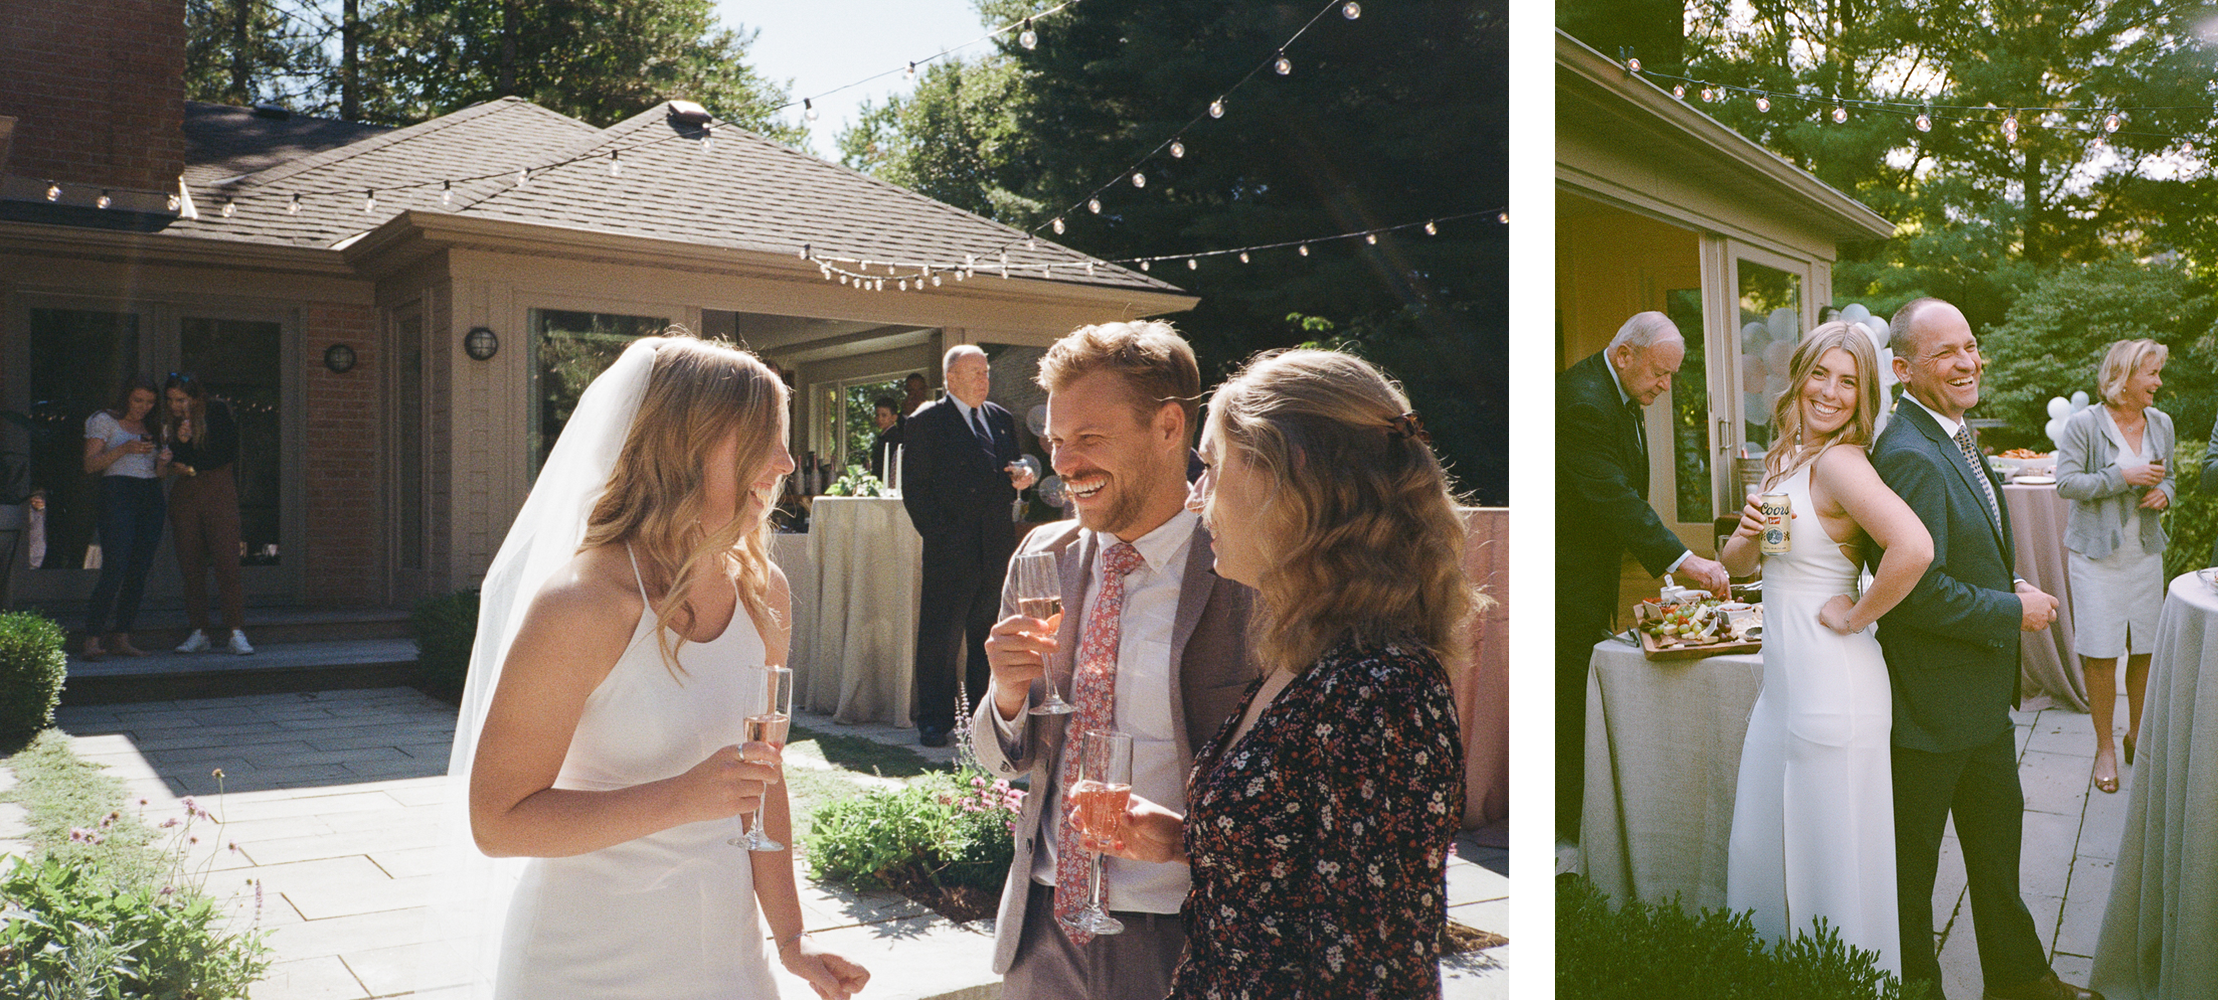 Backyard-Elopement-on-Film-Analog-Pool-Party-91.PNG